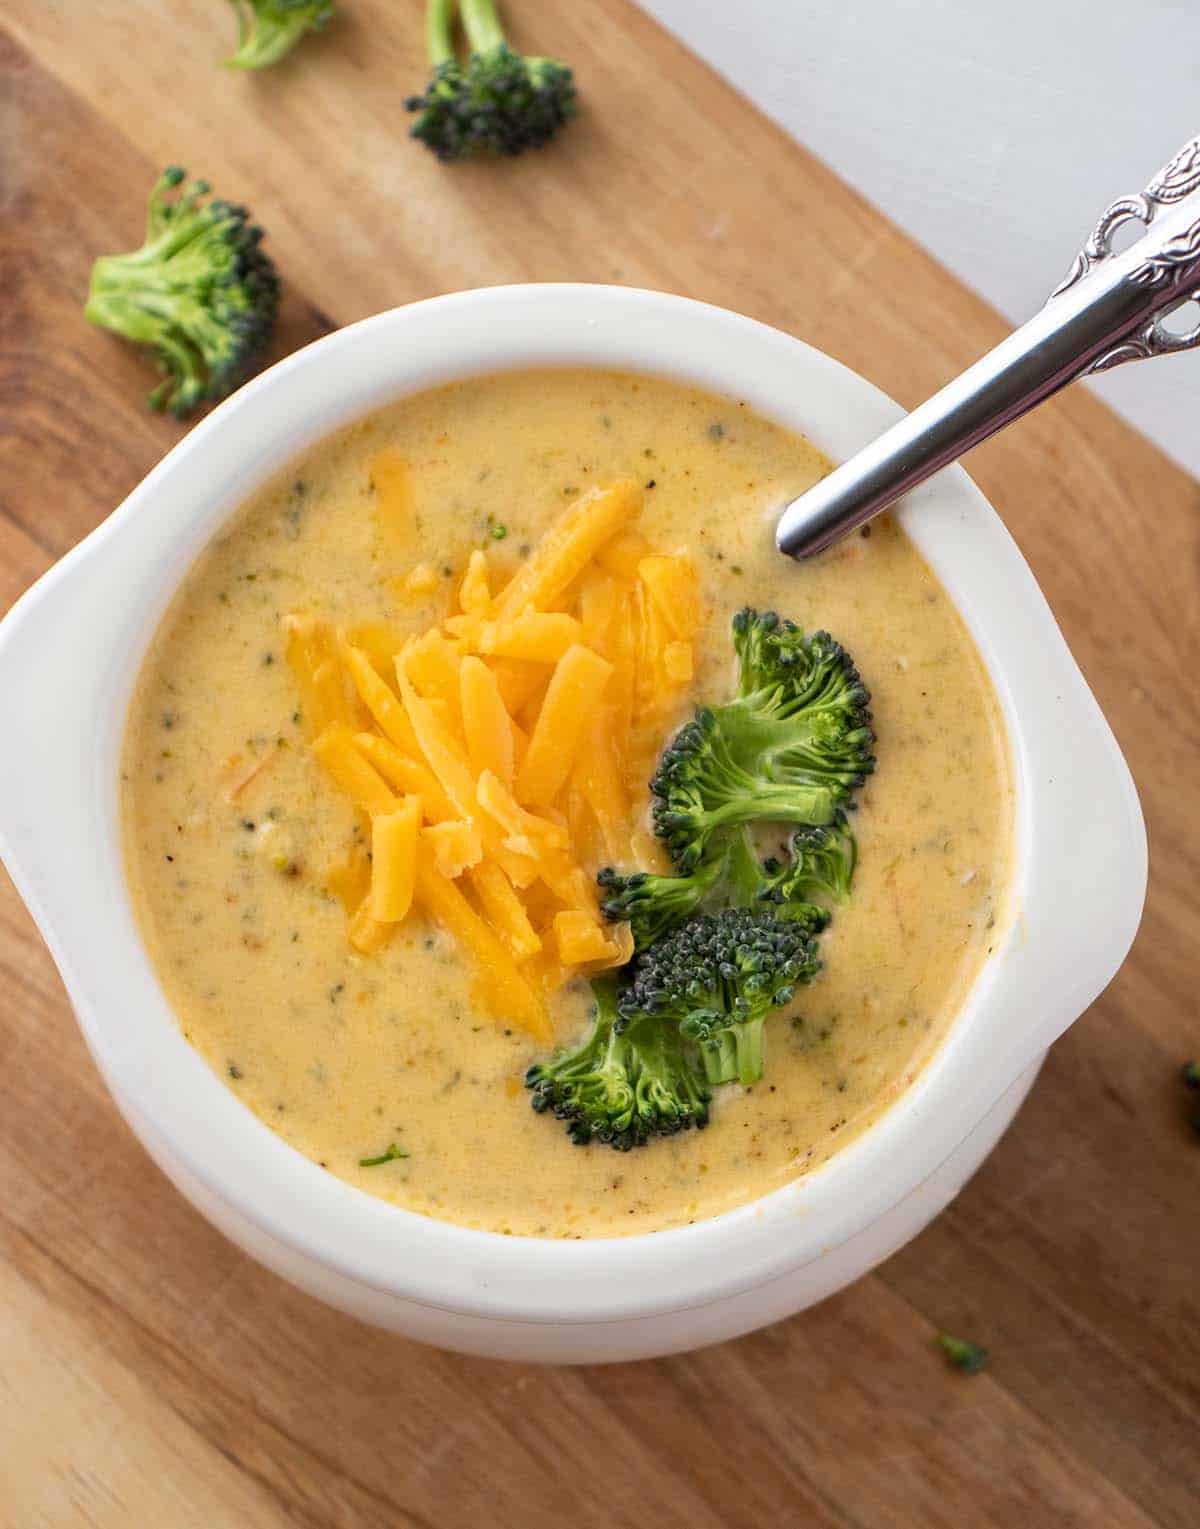 Instant pot broccoli cheddar soup in a white bowl topped with shredded cheddar cheese and broccoli florets. A silver spoon in the bowl and broccoli florets next to the bowl.